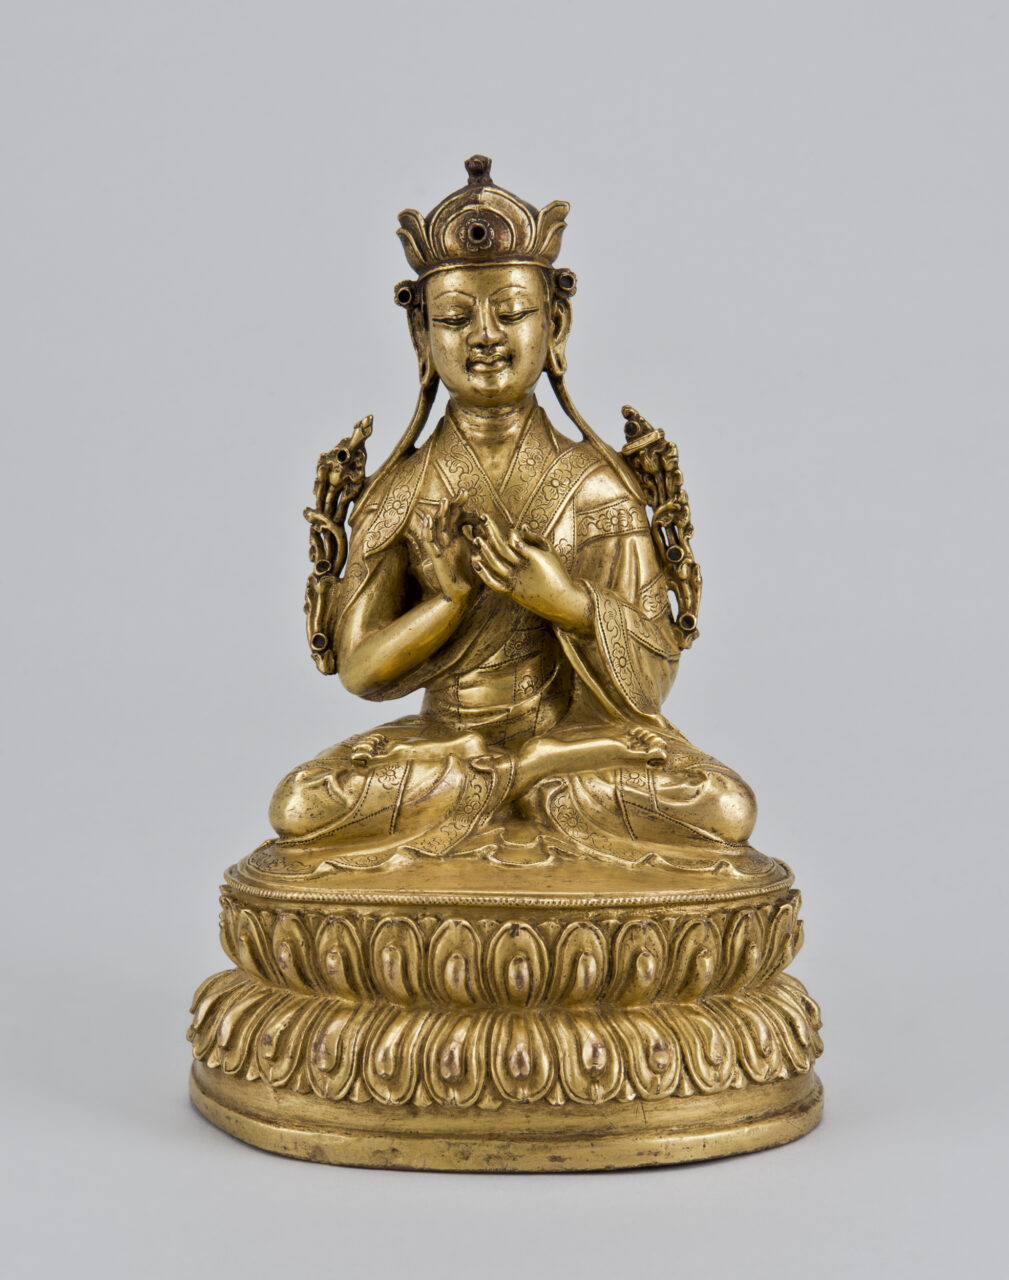 Golden statuette depicting lama seated on lotus pedestal with hands in mudras at chest